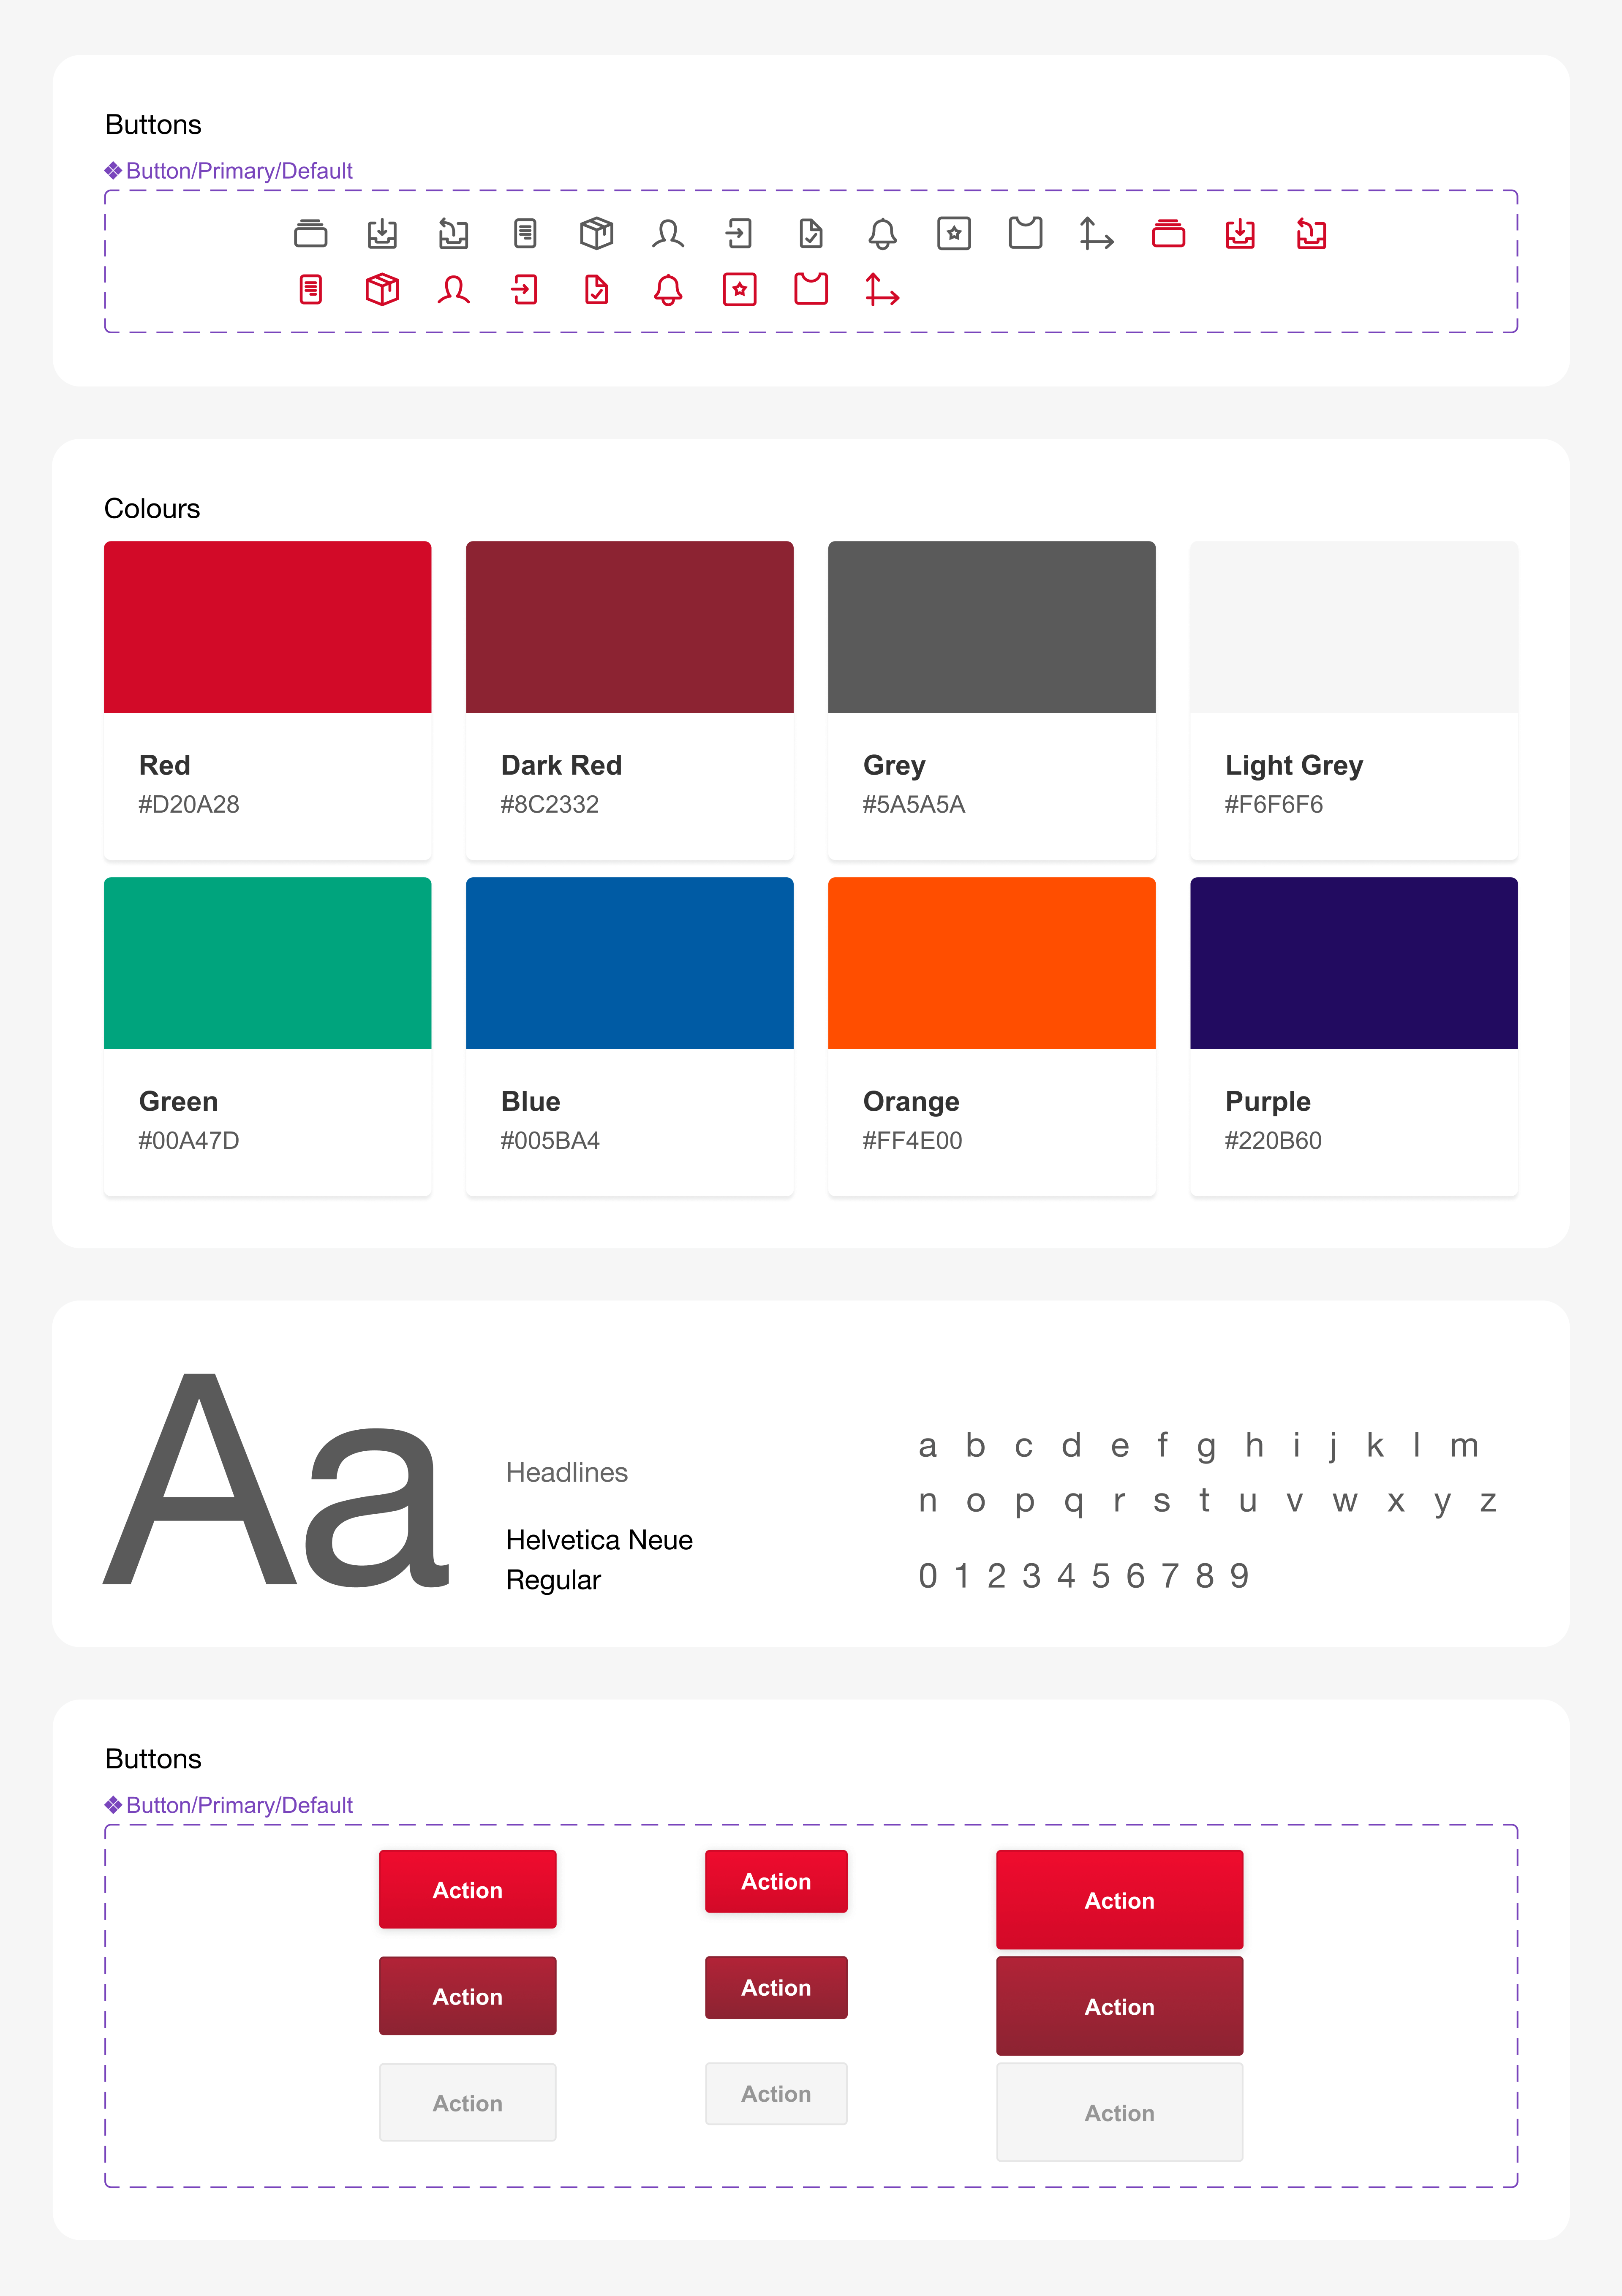 The new Design System designed for Hafele UK showcasing the main colours, typography and button types allowed